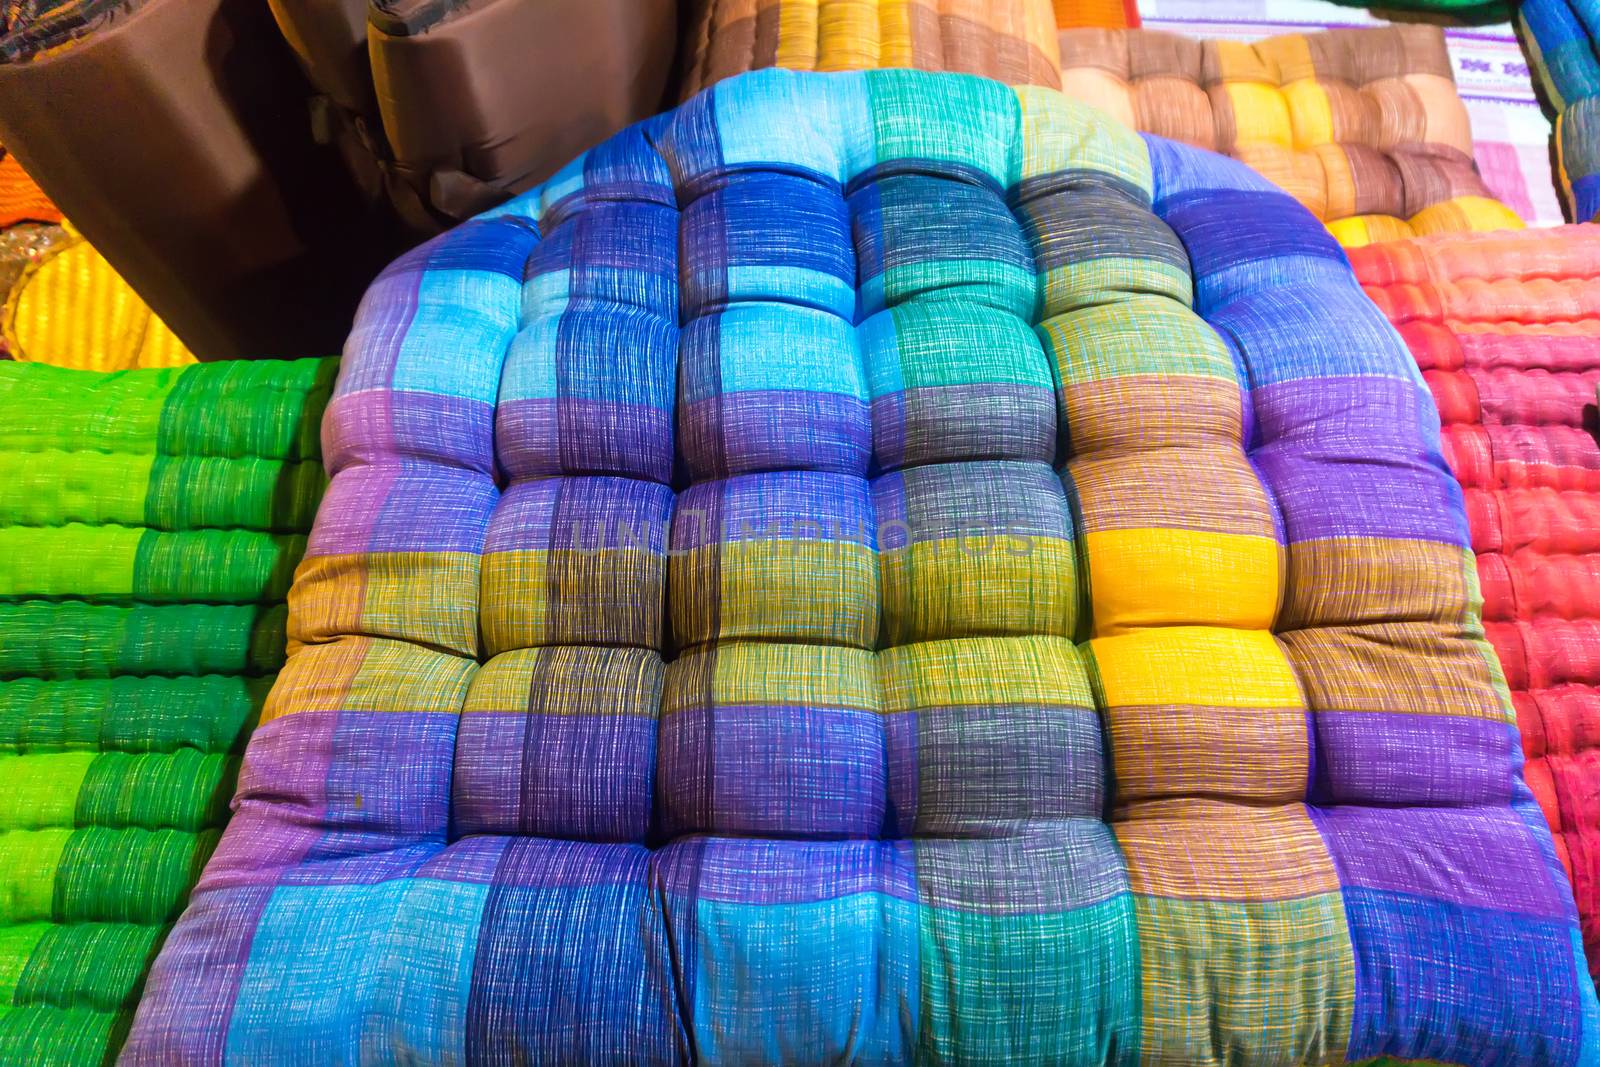 Colorful fabrics sit pillow at street market in thailand.